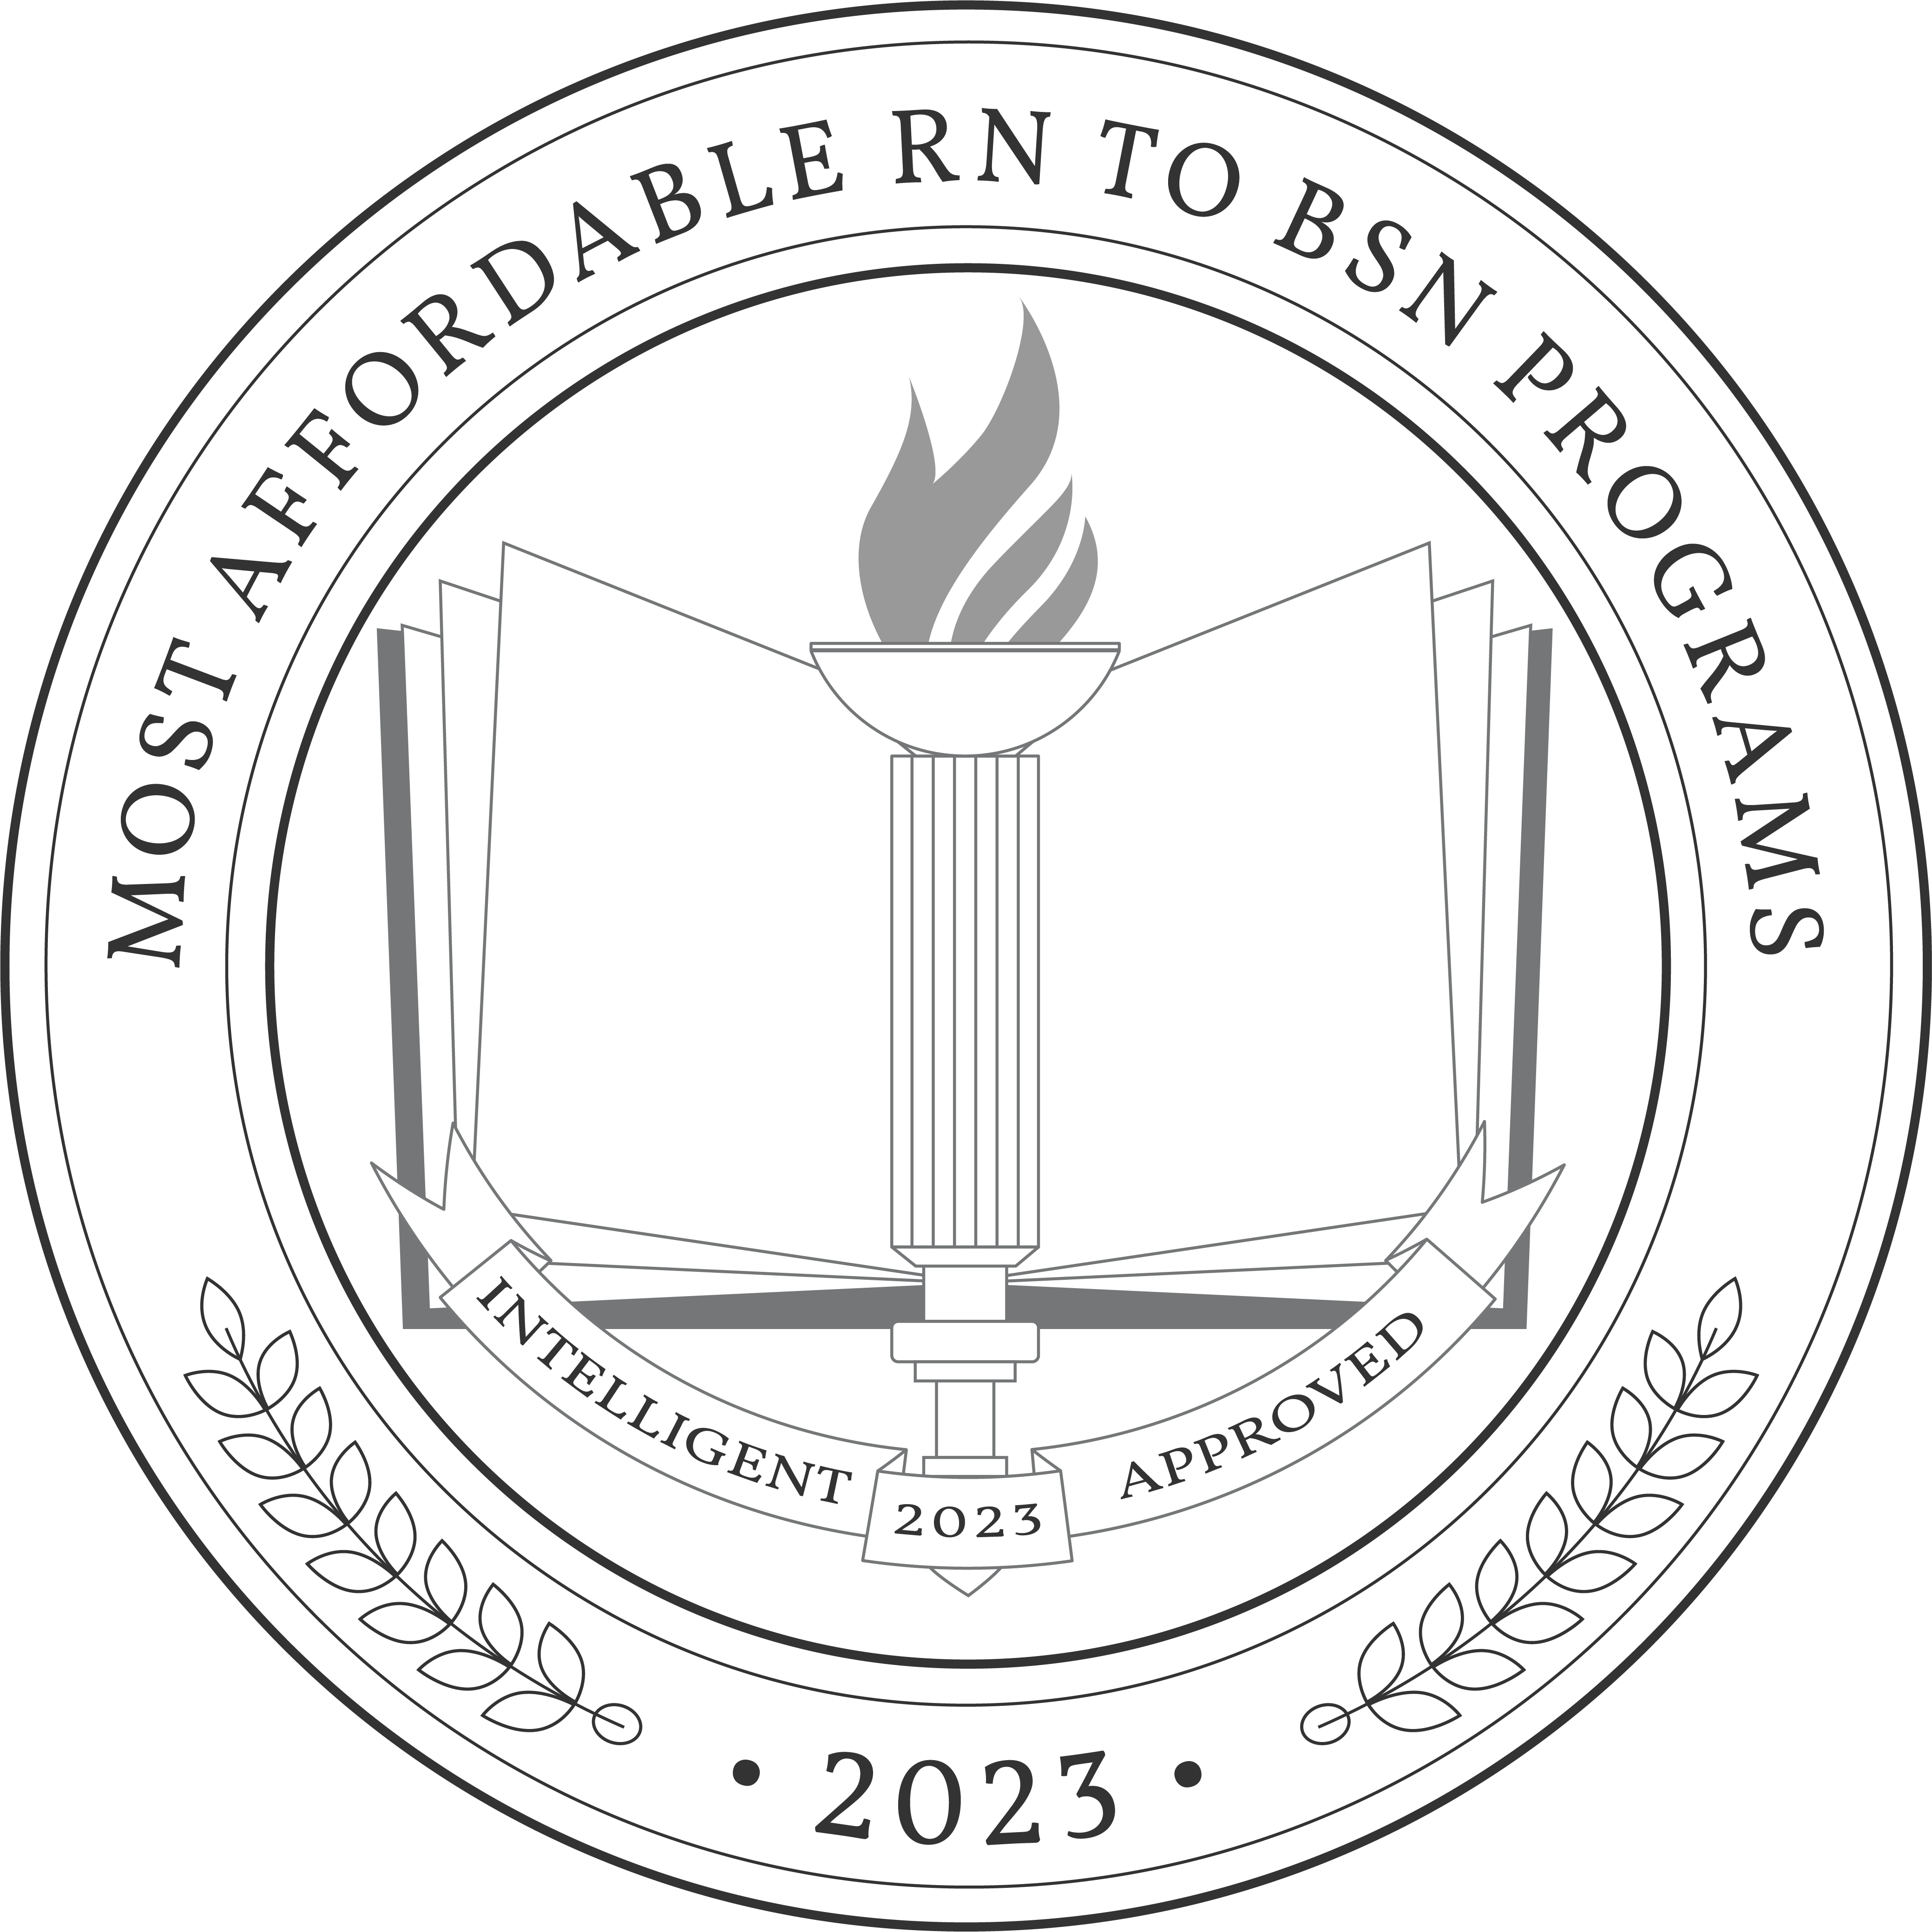 affordable rn to bsn program badge 2023